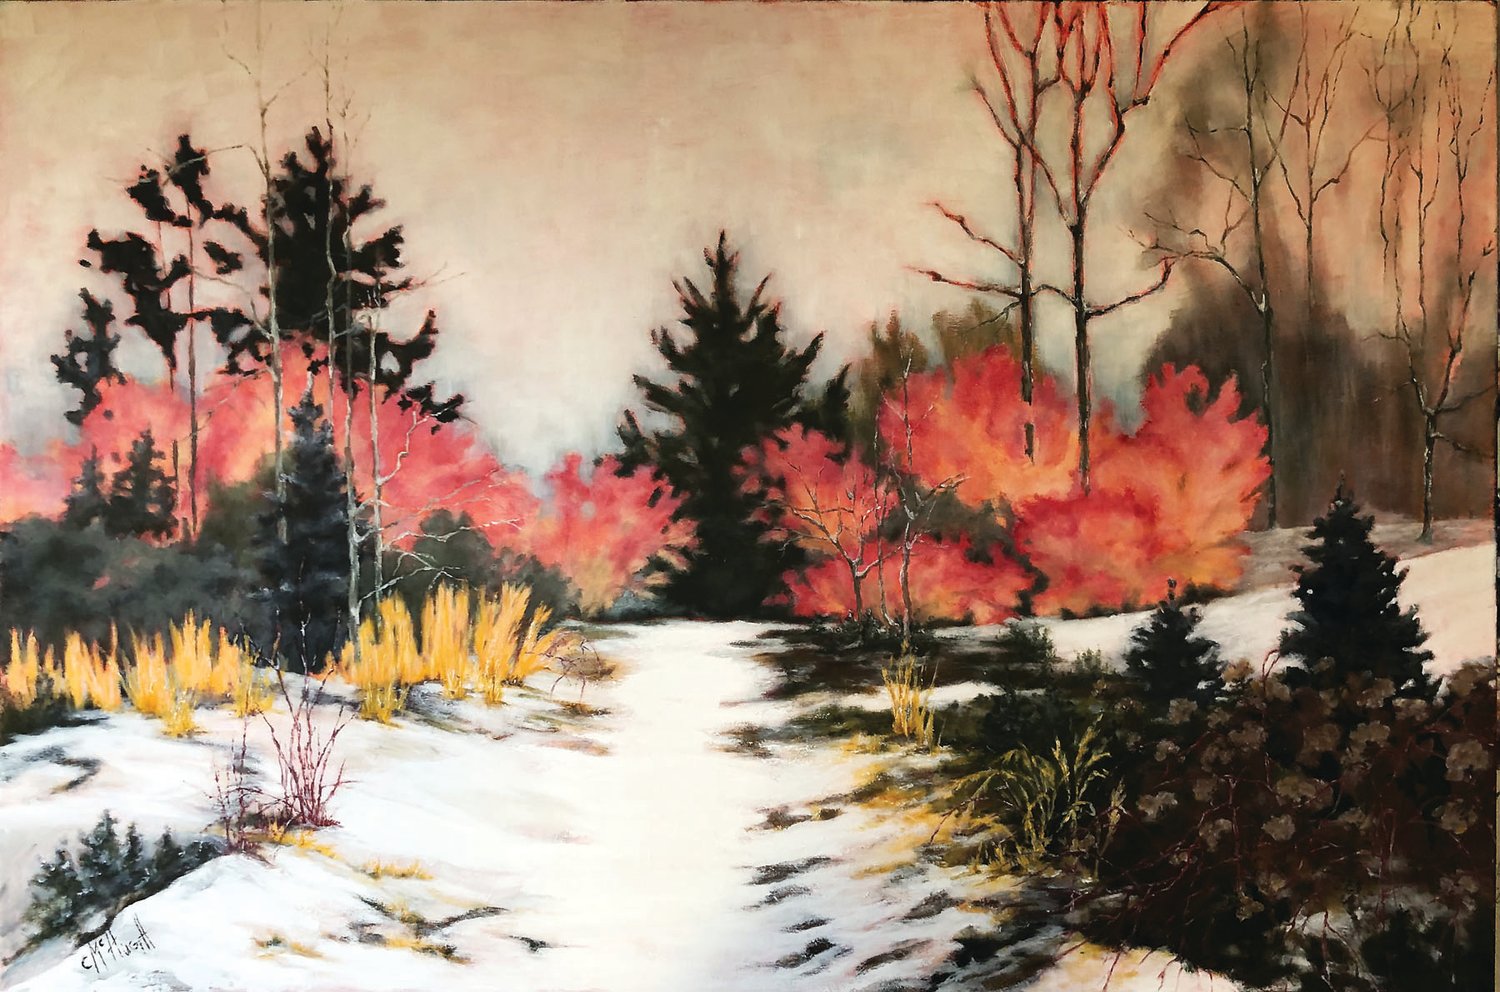 “Winter Walk” is an oil on wrapped linen by Christine McHugh.